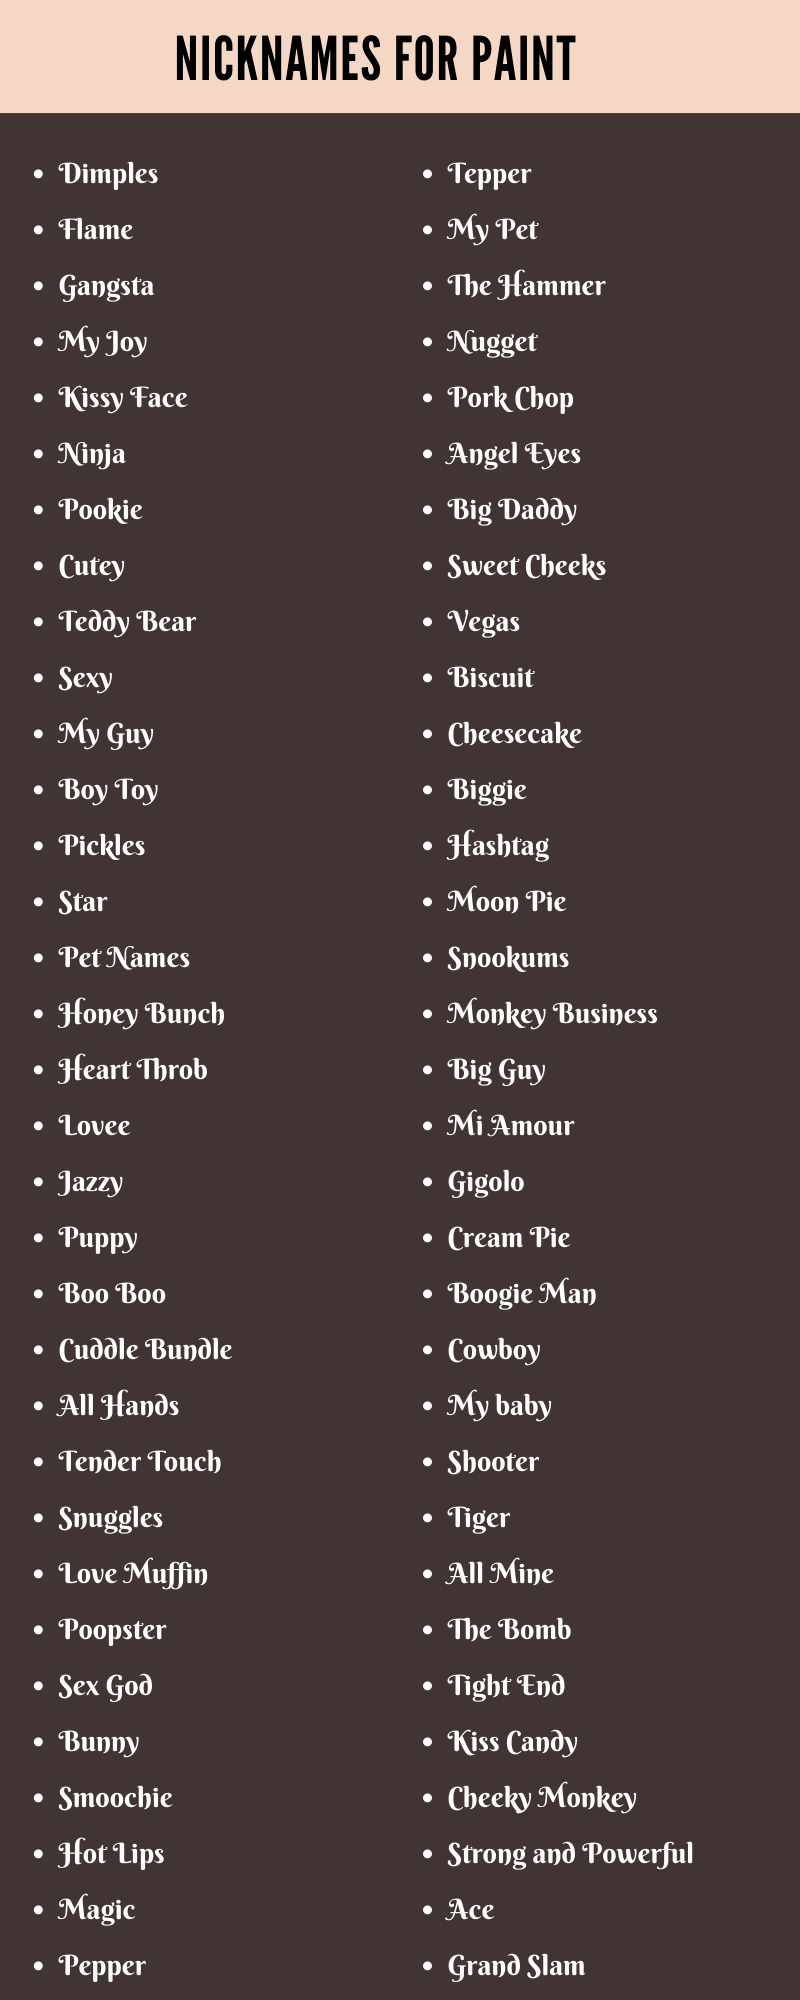 Nicknames for Paint